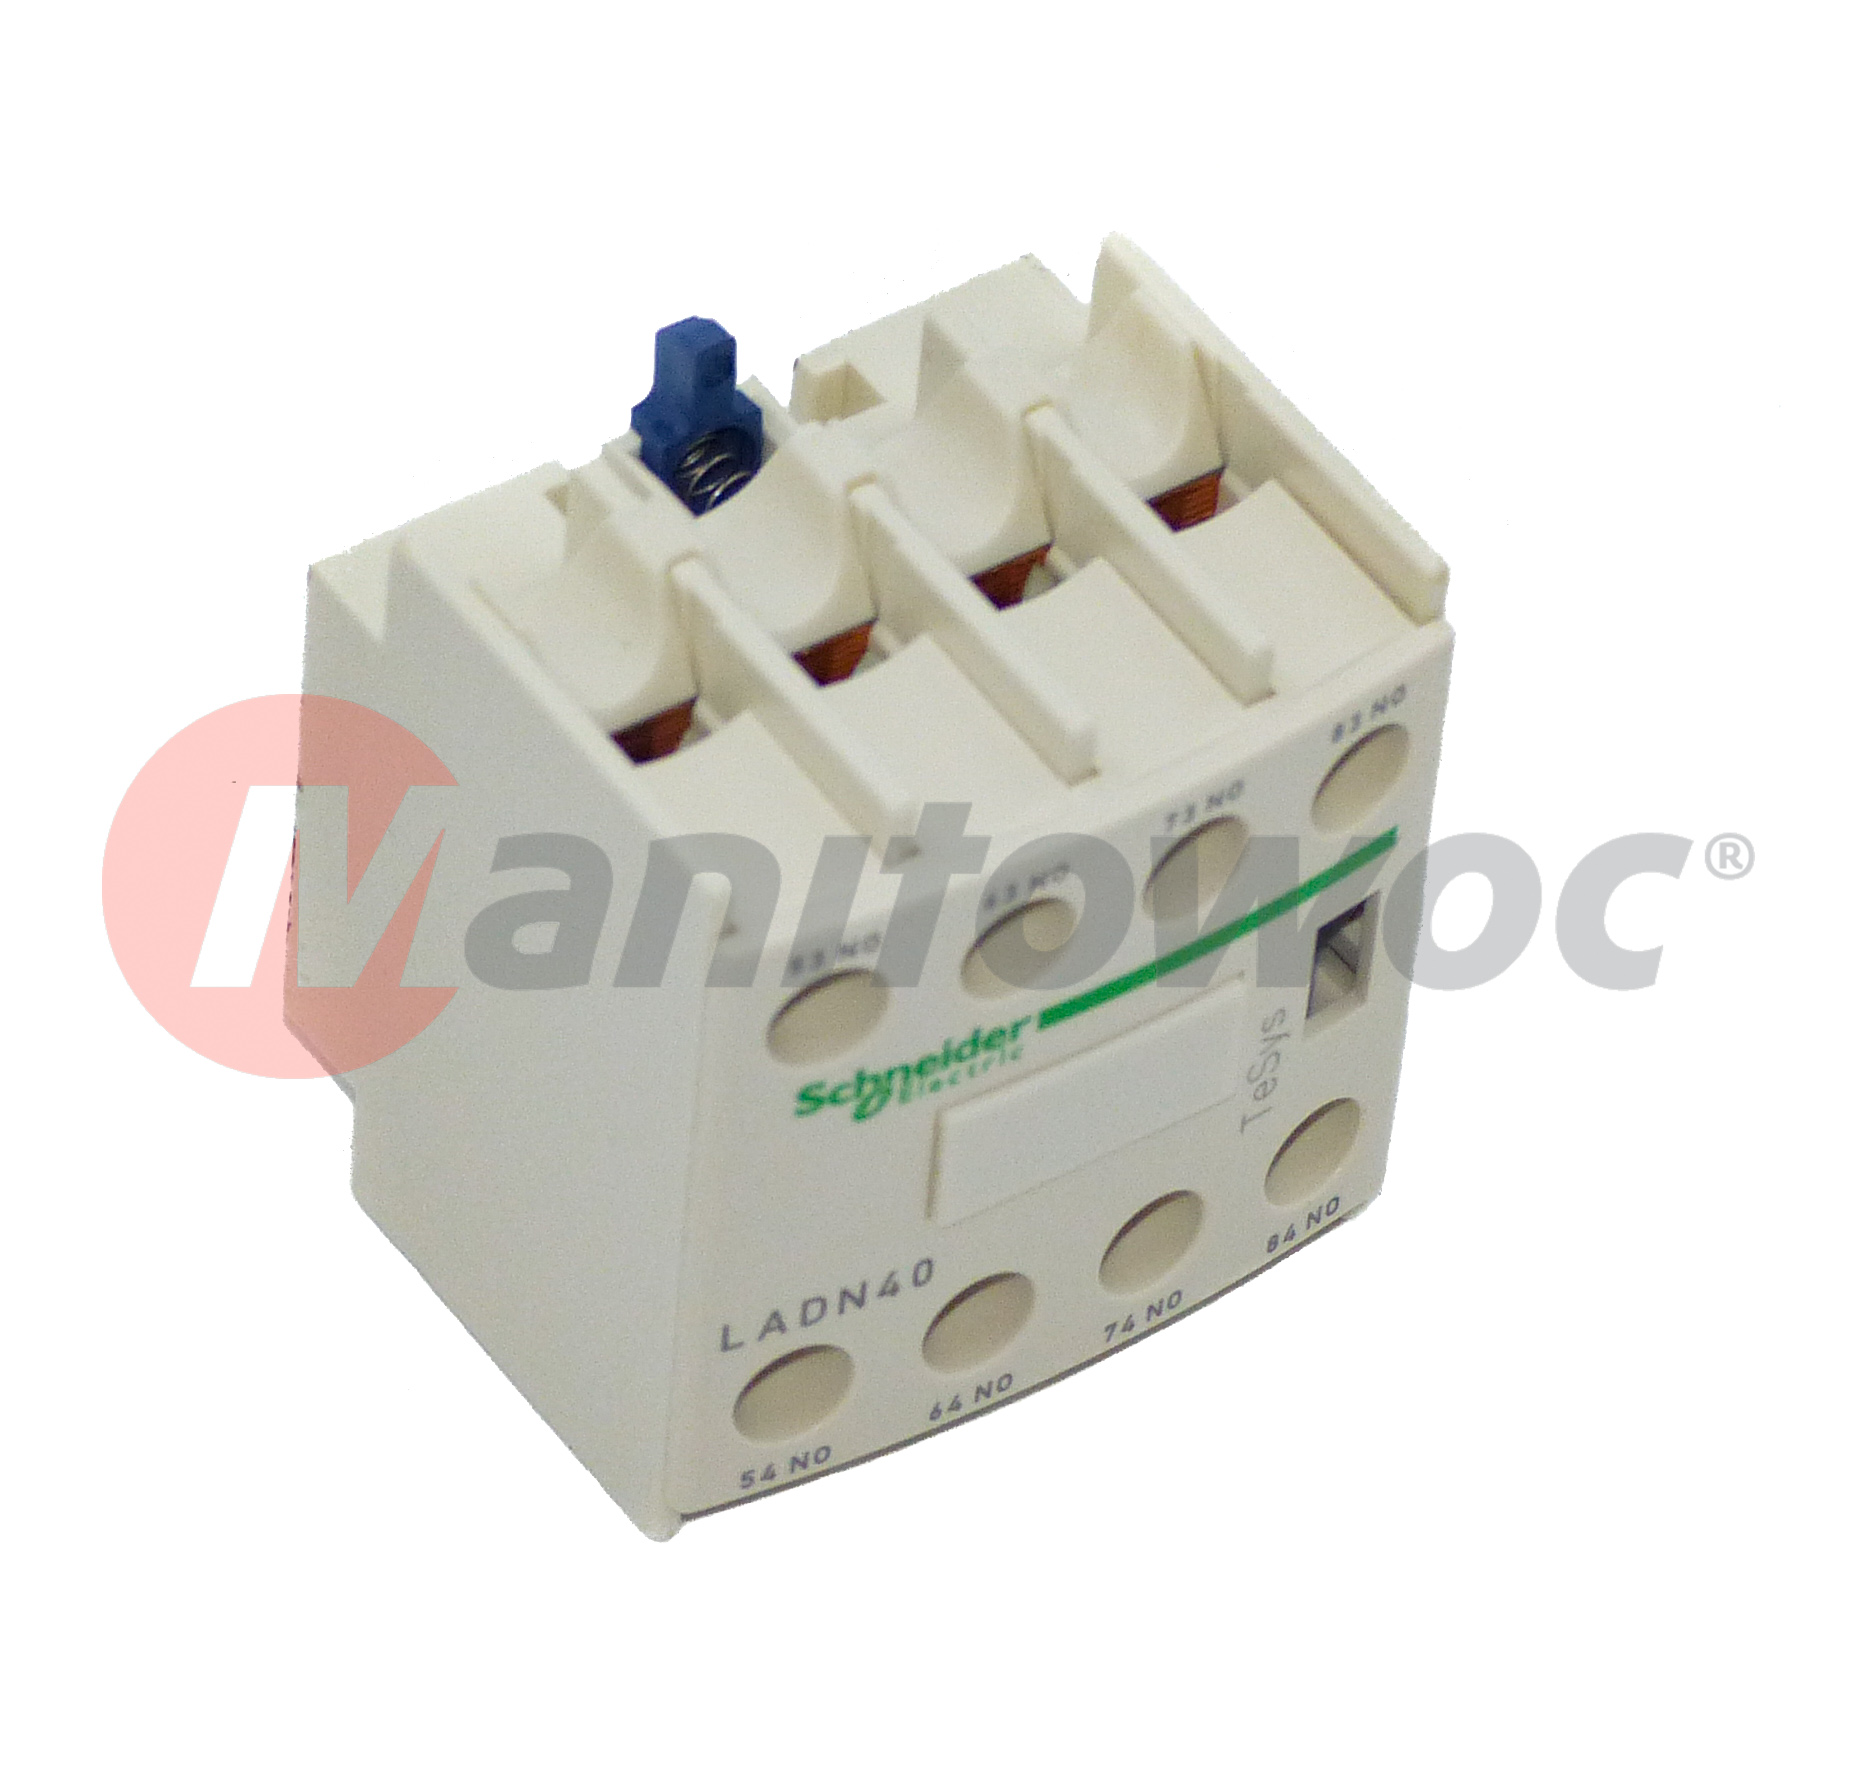 8 700 1022 - "AUXILIARY BLOCK 2F+20 FRONT"